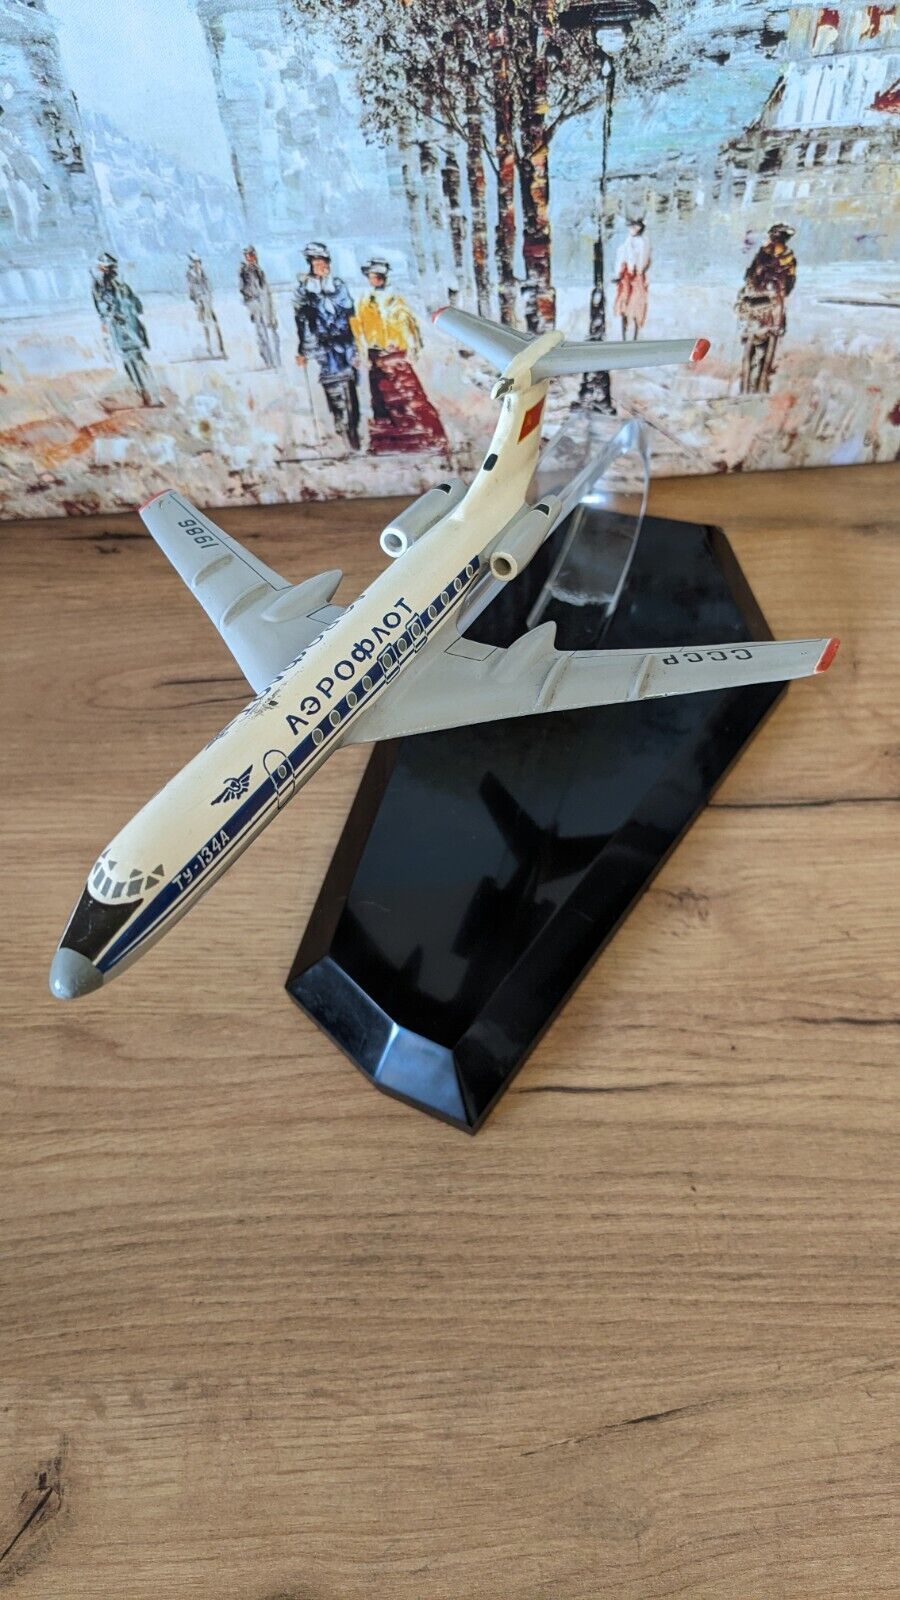 Exclusive metal collection aircraft large-scale model TU-134A (1980s, Ukraine)